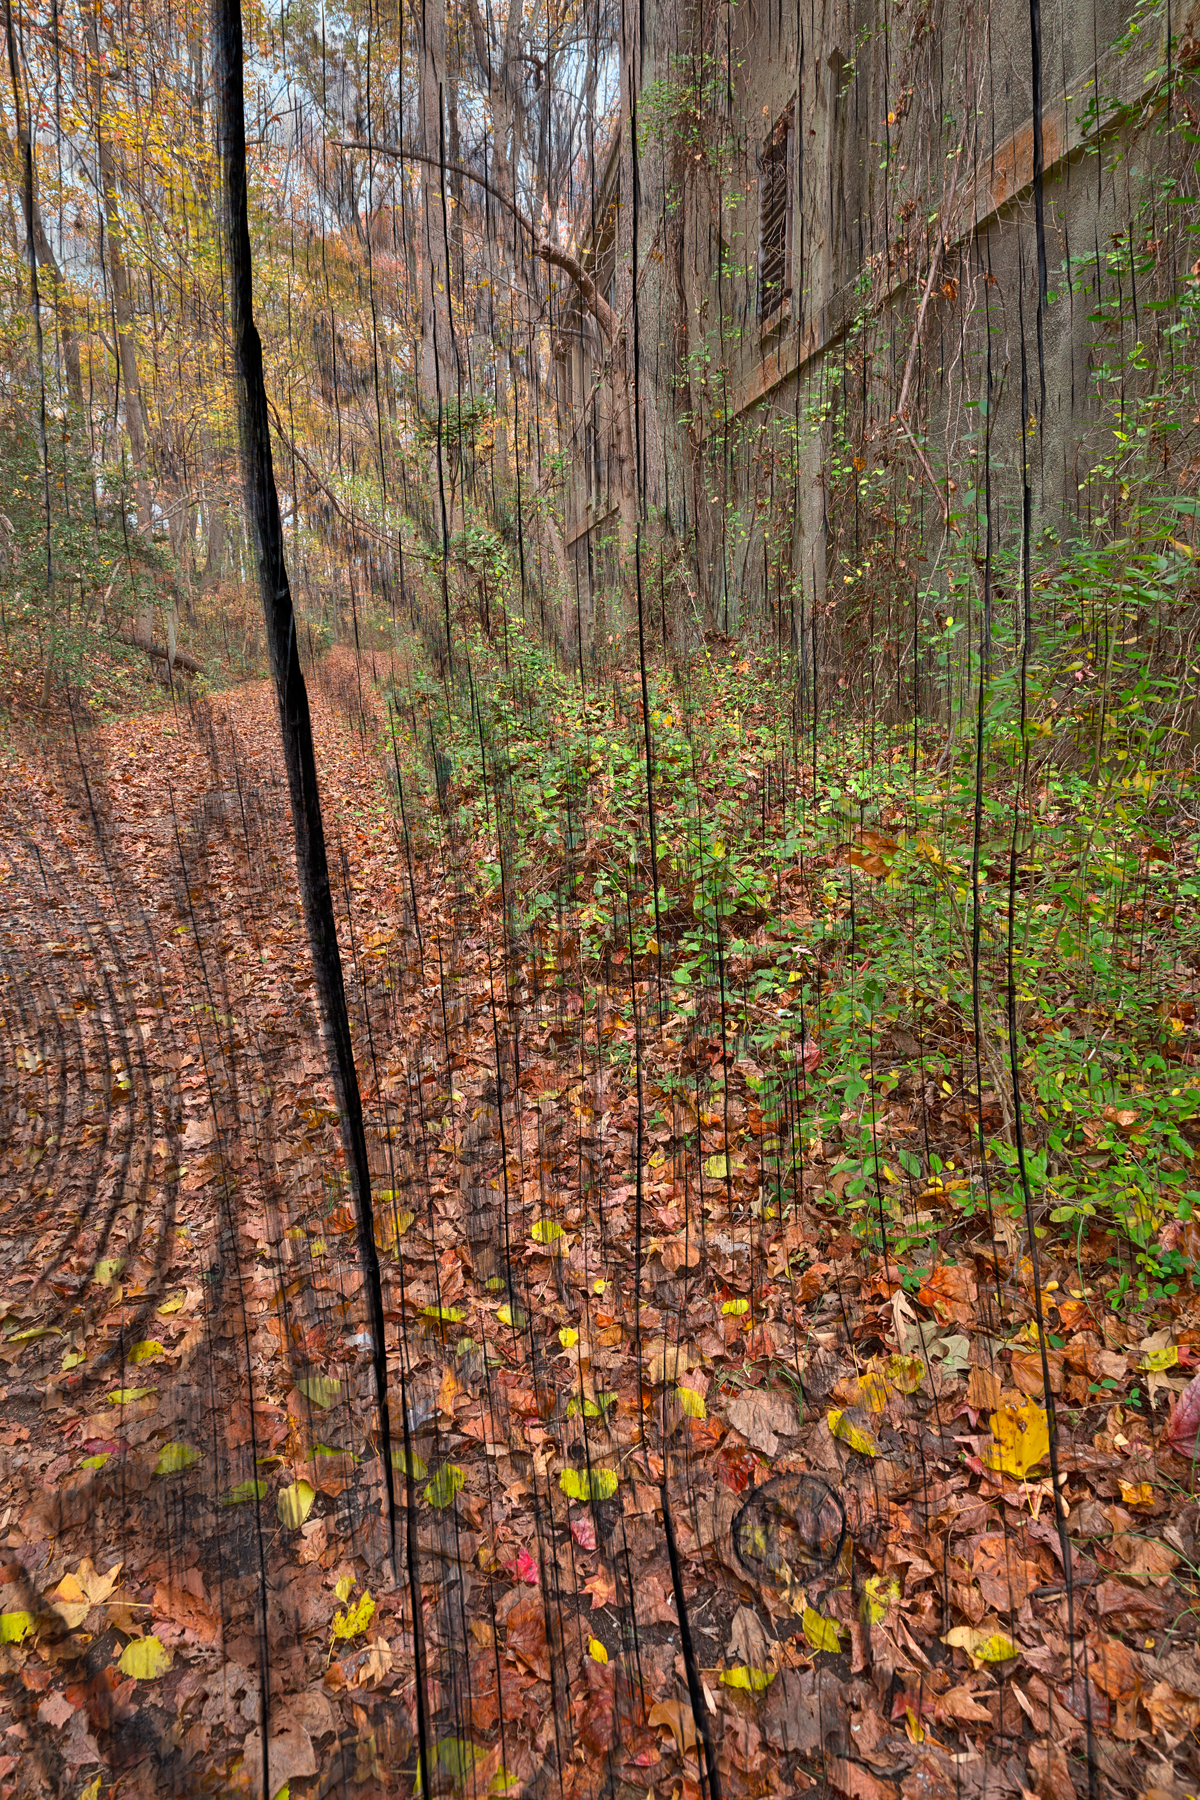 Cracked Wood Autumn Trail, Abandoned, Perspective, Sky, Scenic, HQ Photo